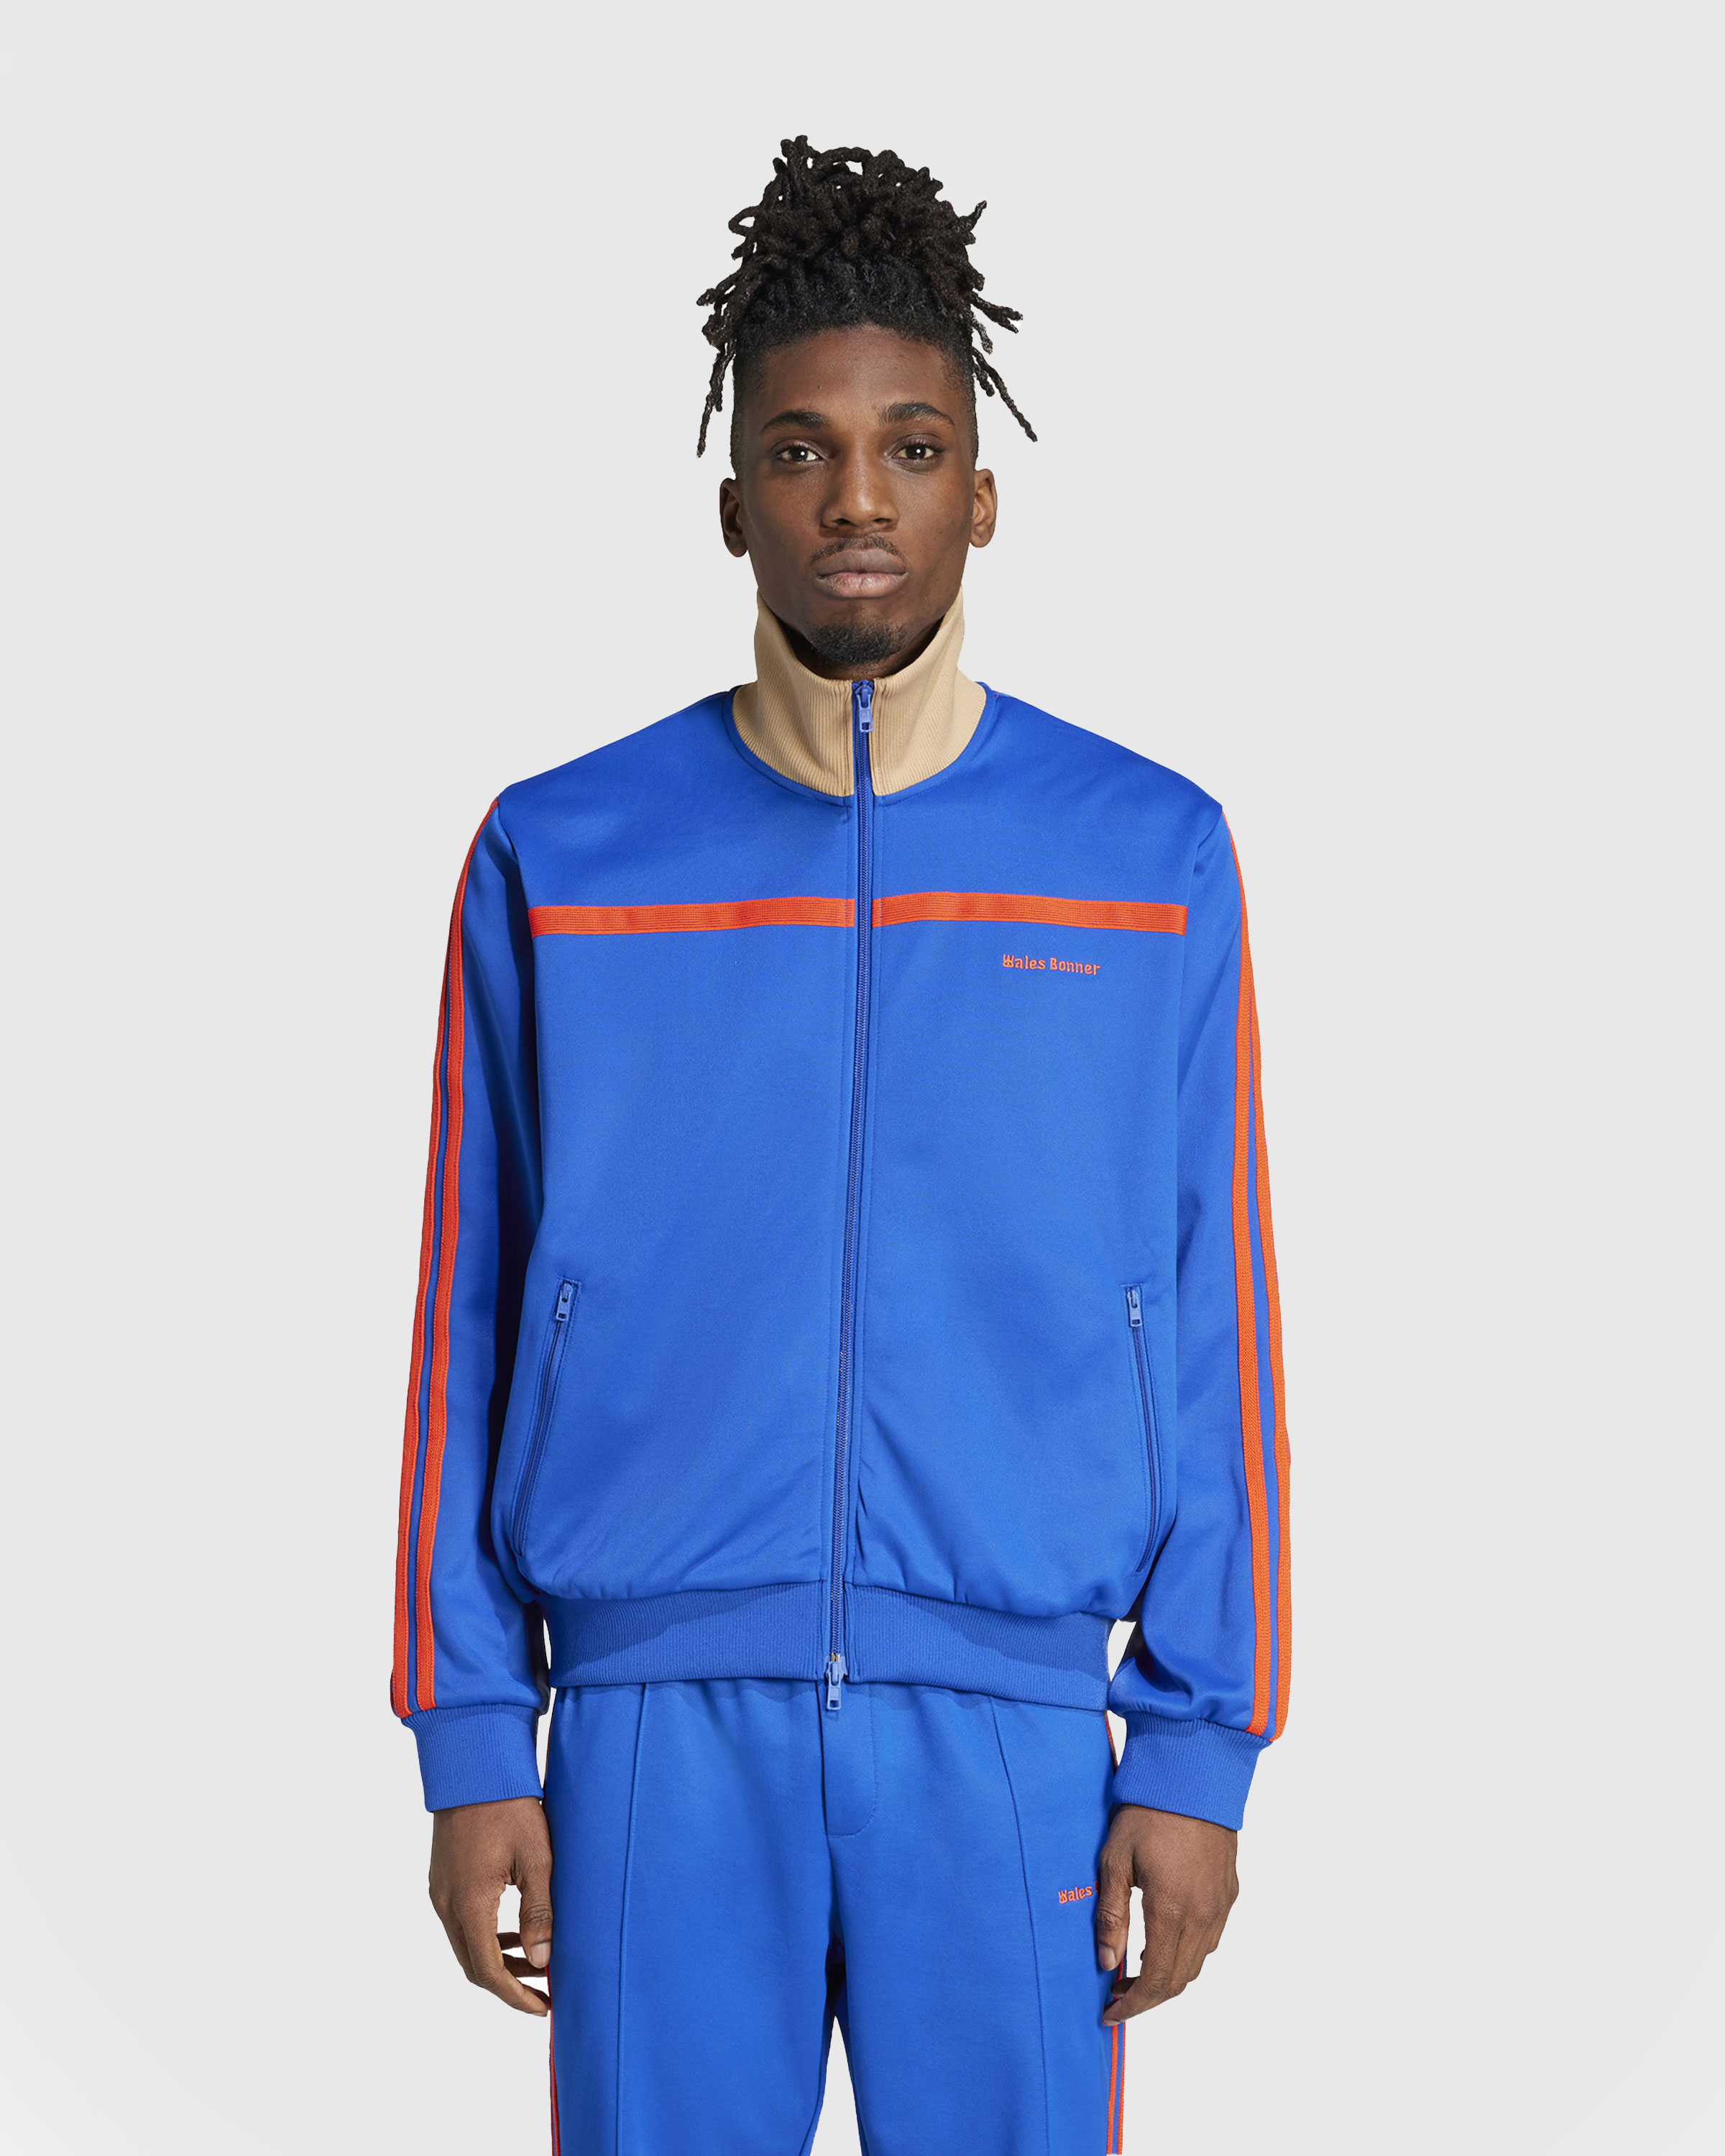 Adidas x Wales Bonner – Jersey Track Top Royal Blue - Track Jackets - Blue - Image 2